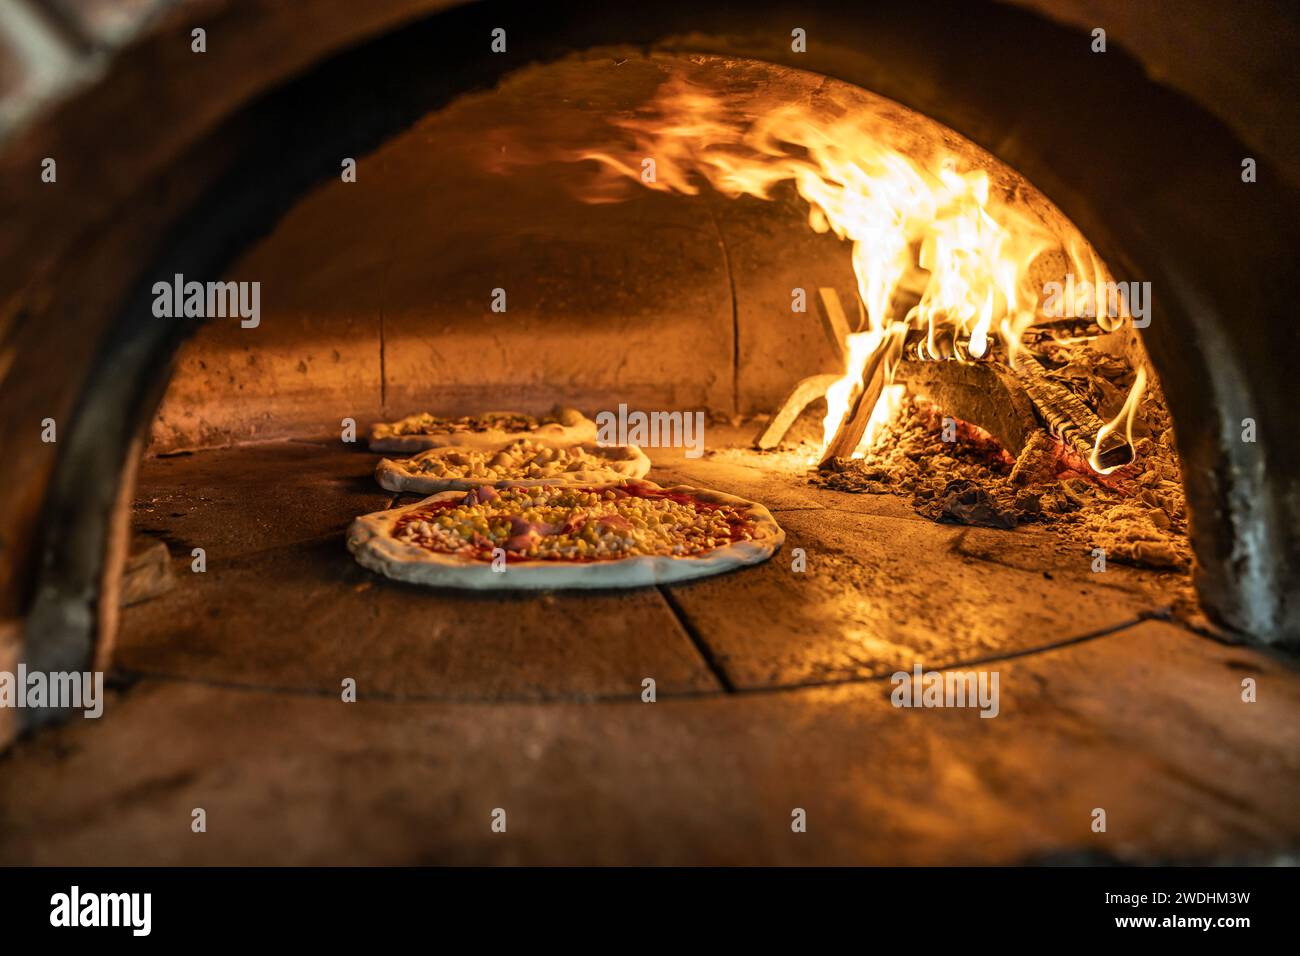 Traditional oven for baking pizza with burning wood and shovel. Several pizzas are baked in a brick oven. Stock Photo